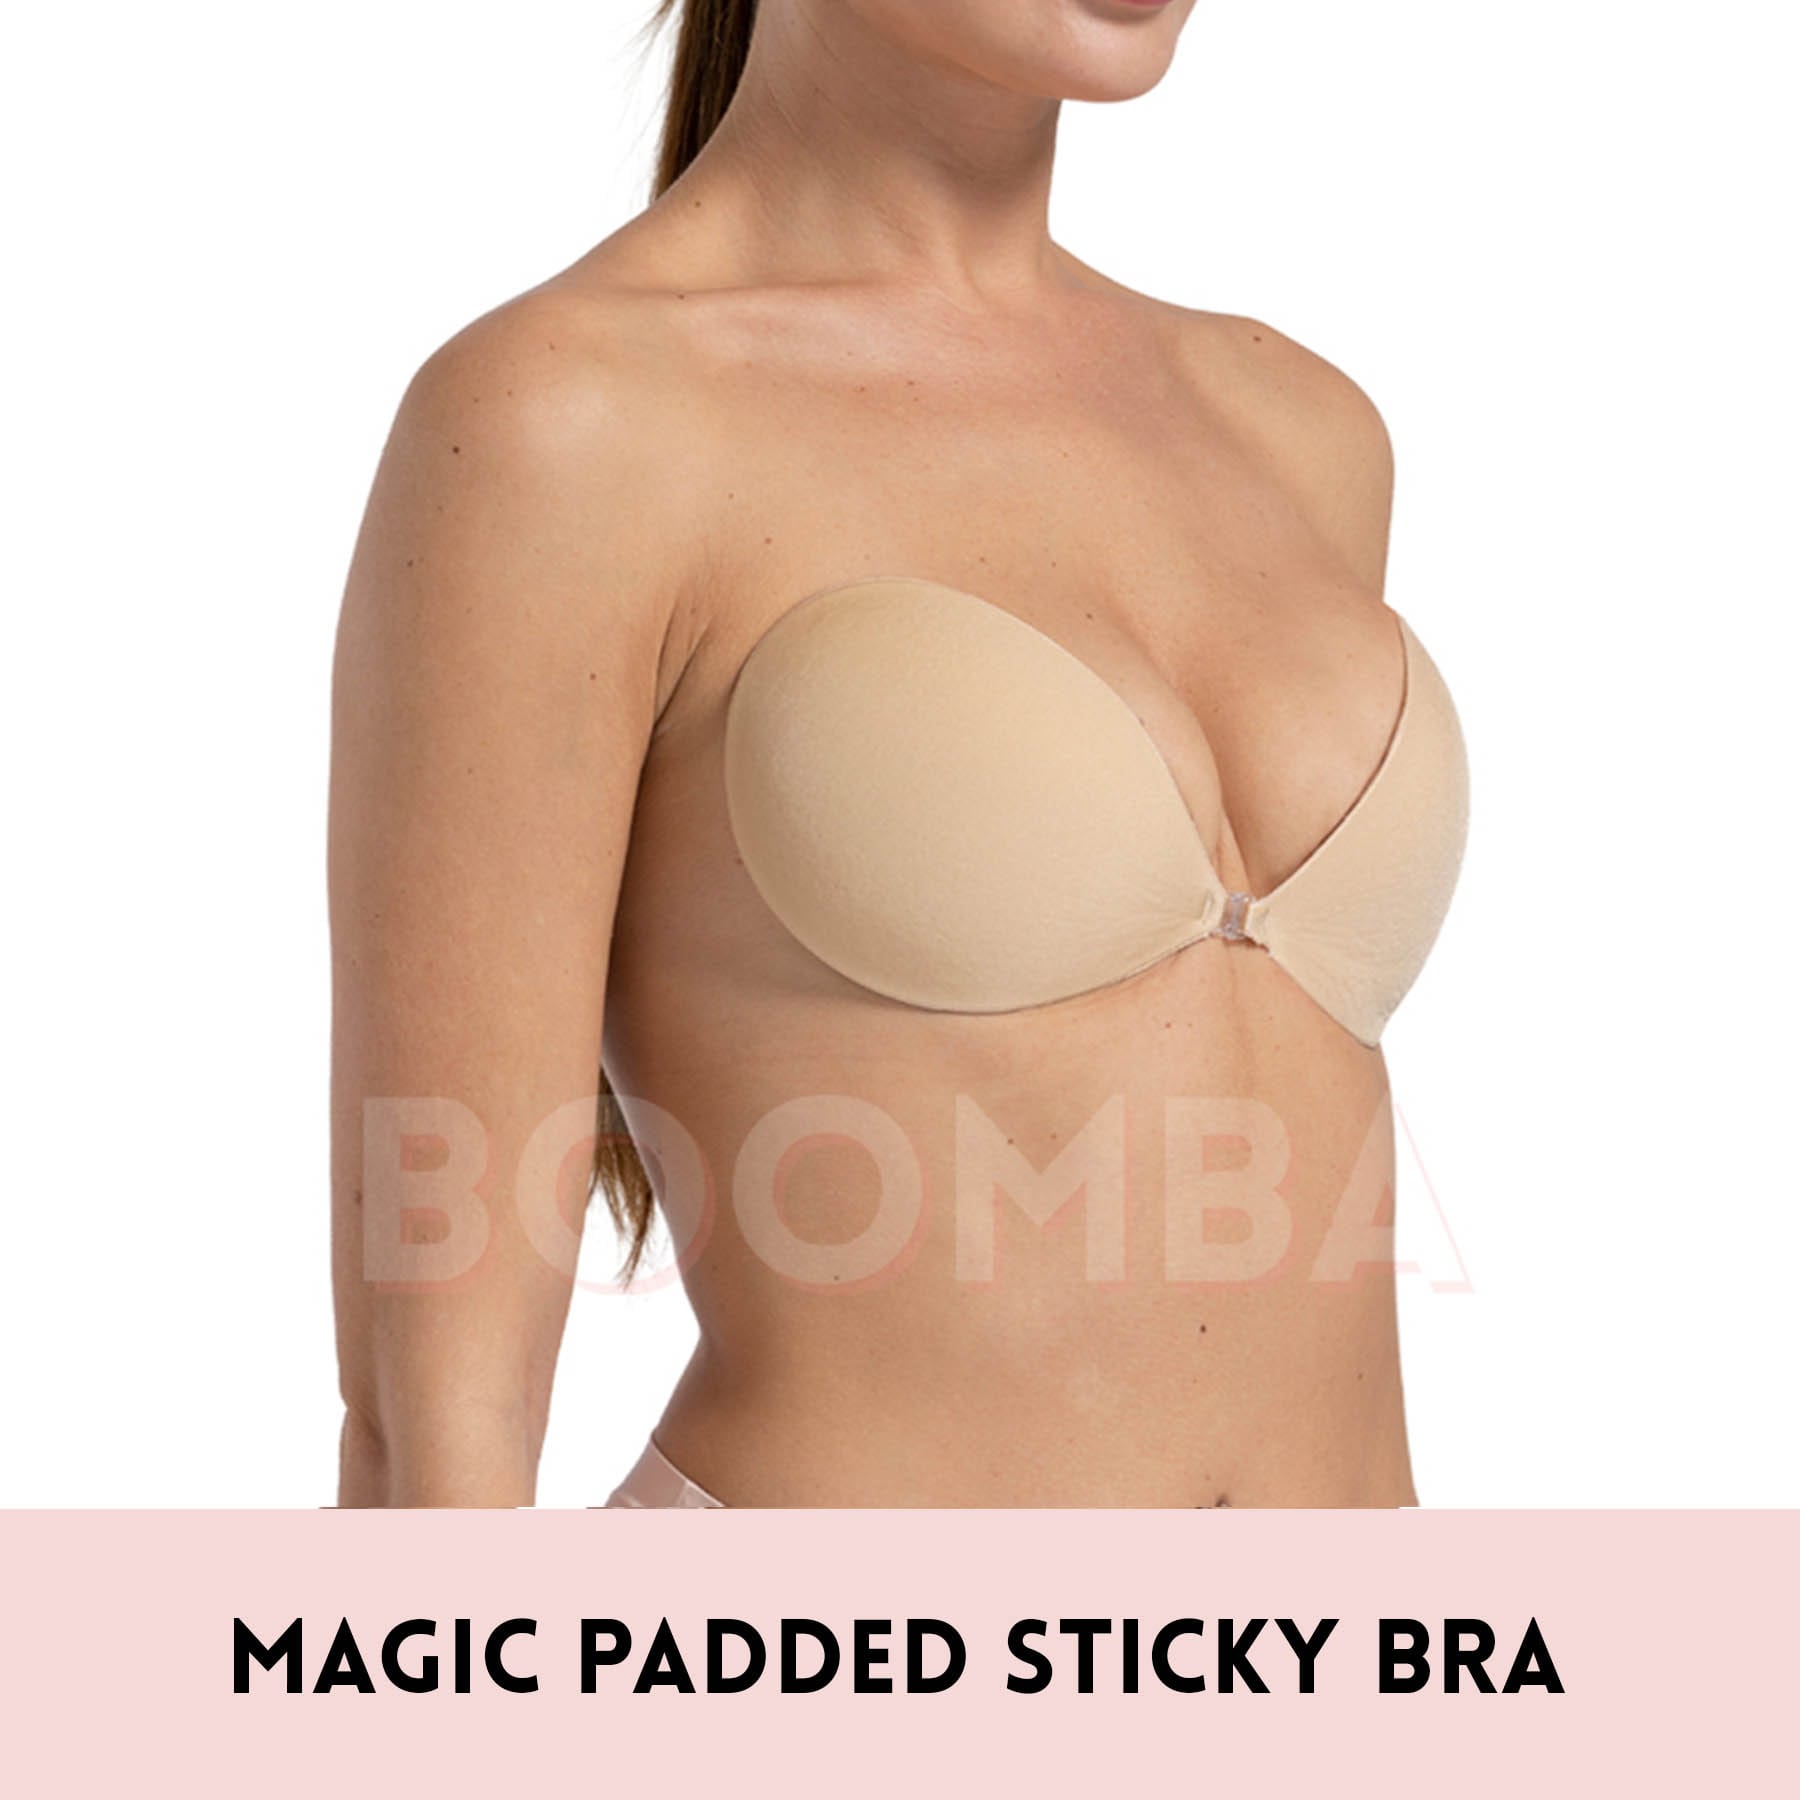 How to Clean Sticky Bras  25 Best Tips for a Clean Adhesive Bra